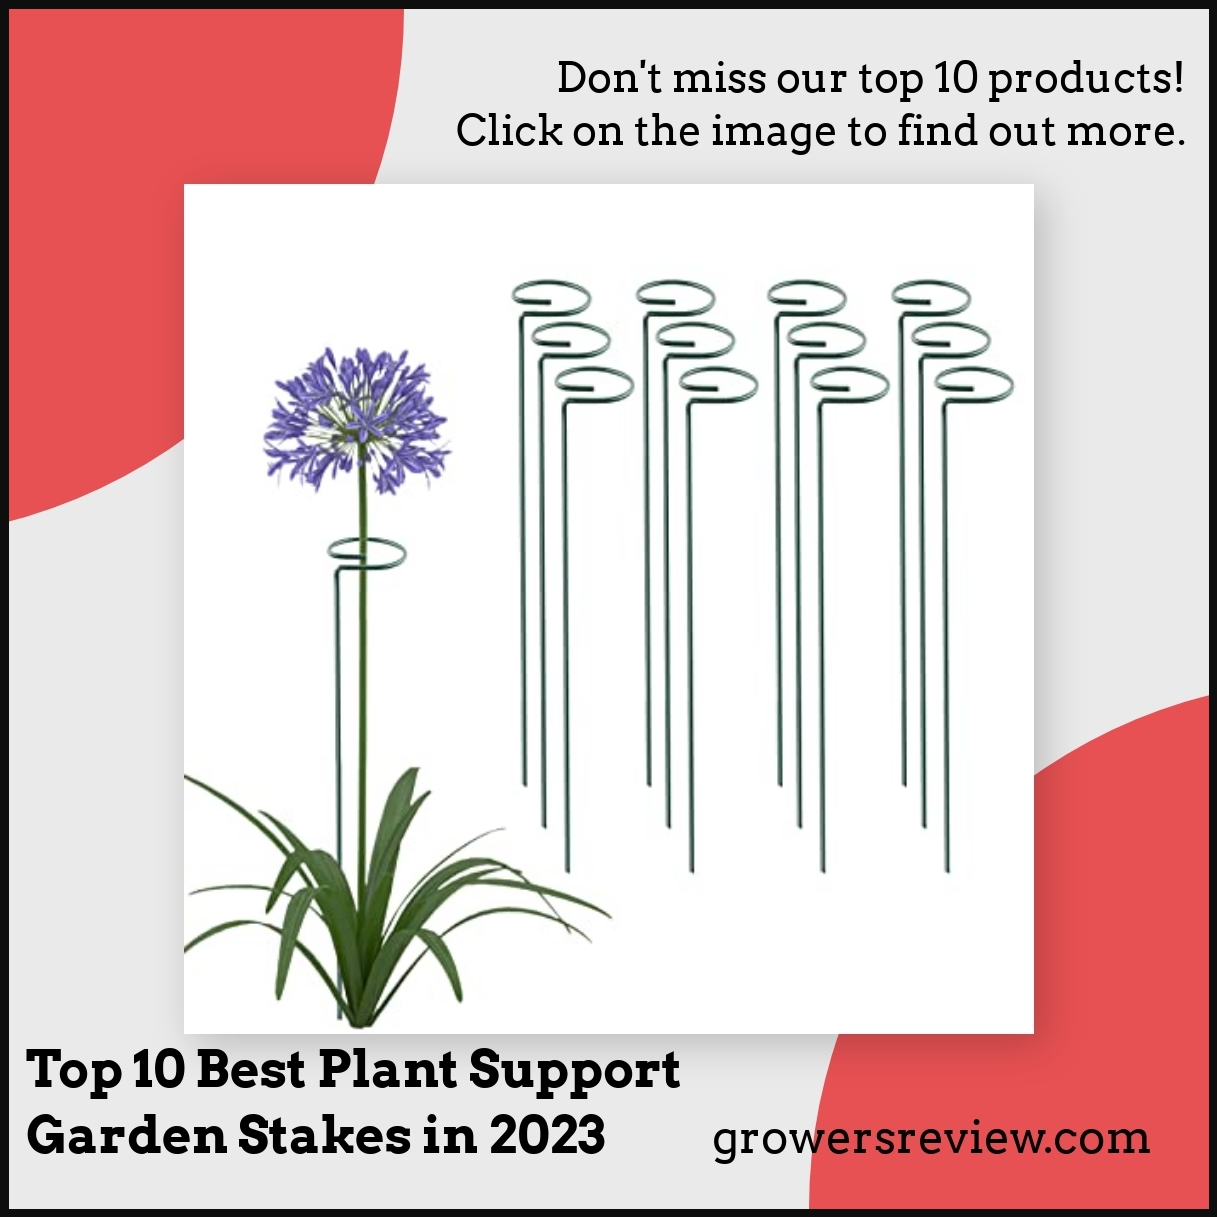 Top 10 Best Plant Support Garden Stakes in 2023